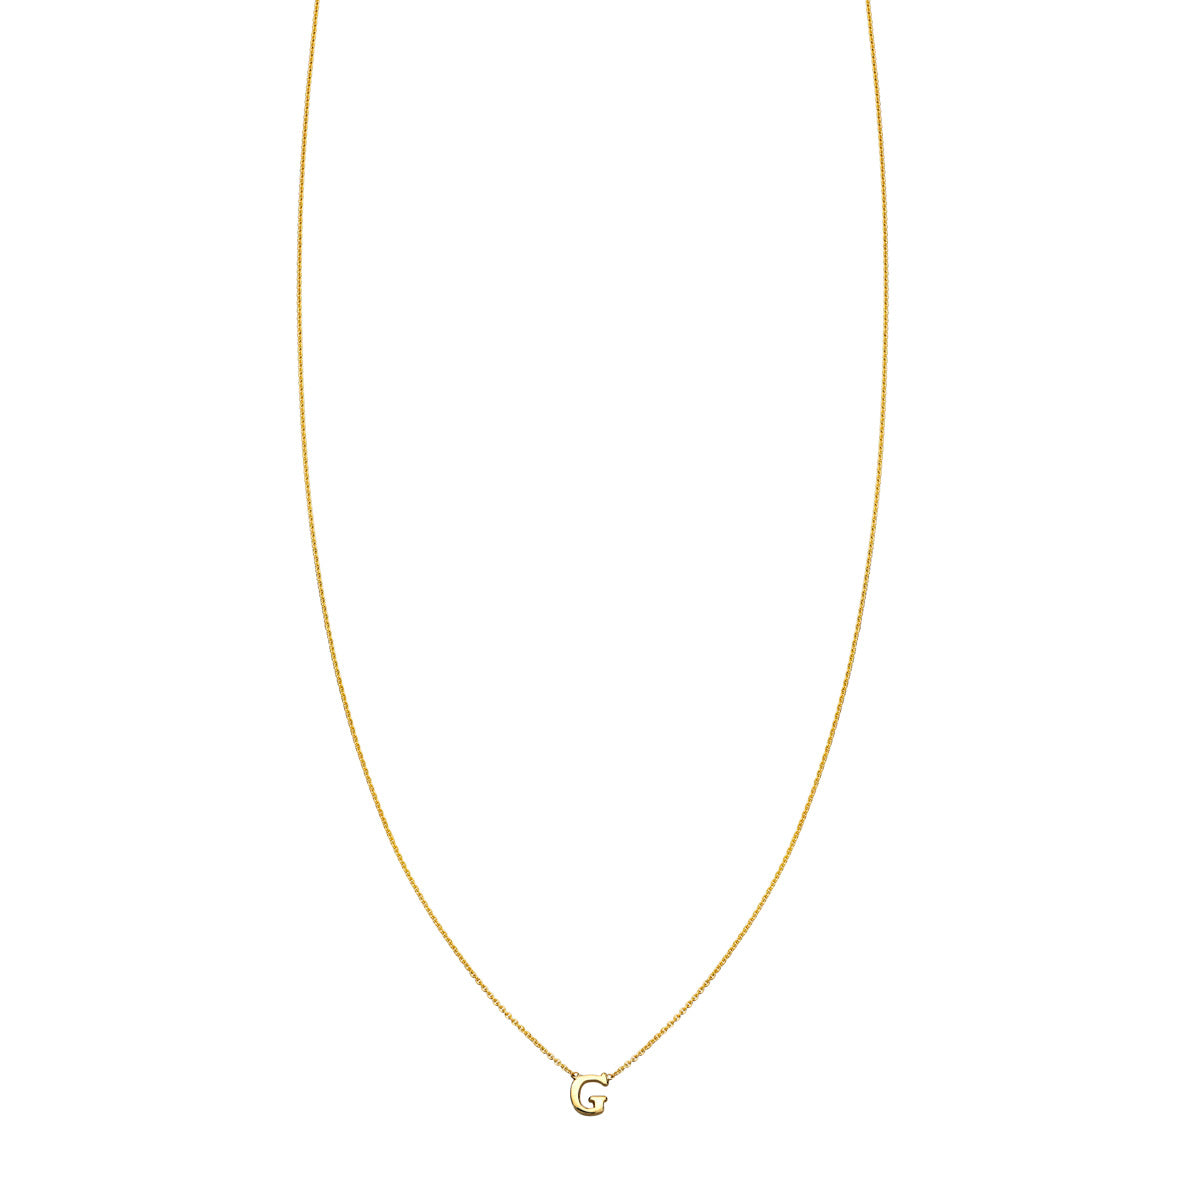 Handcrafted gold 'G' initial necklace, personalized jewelry for your ensemble